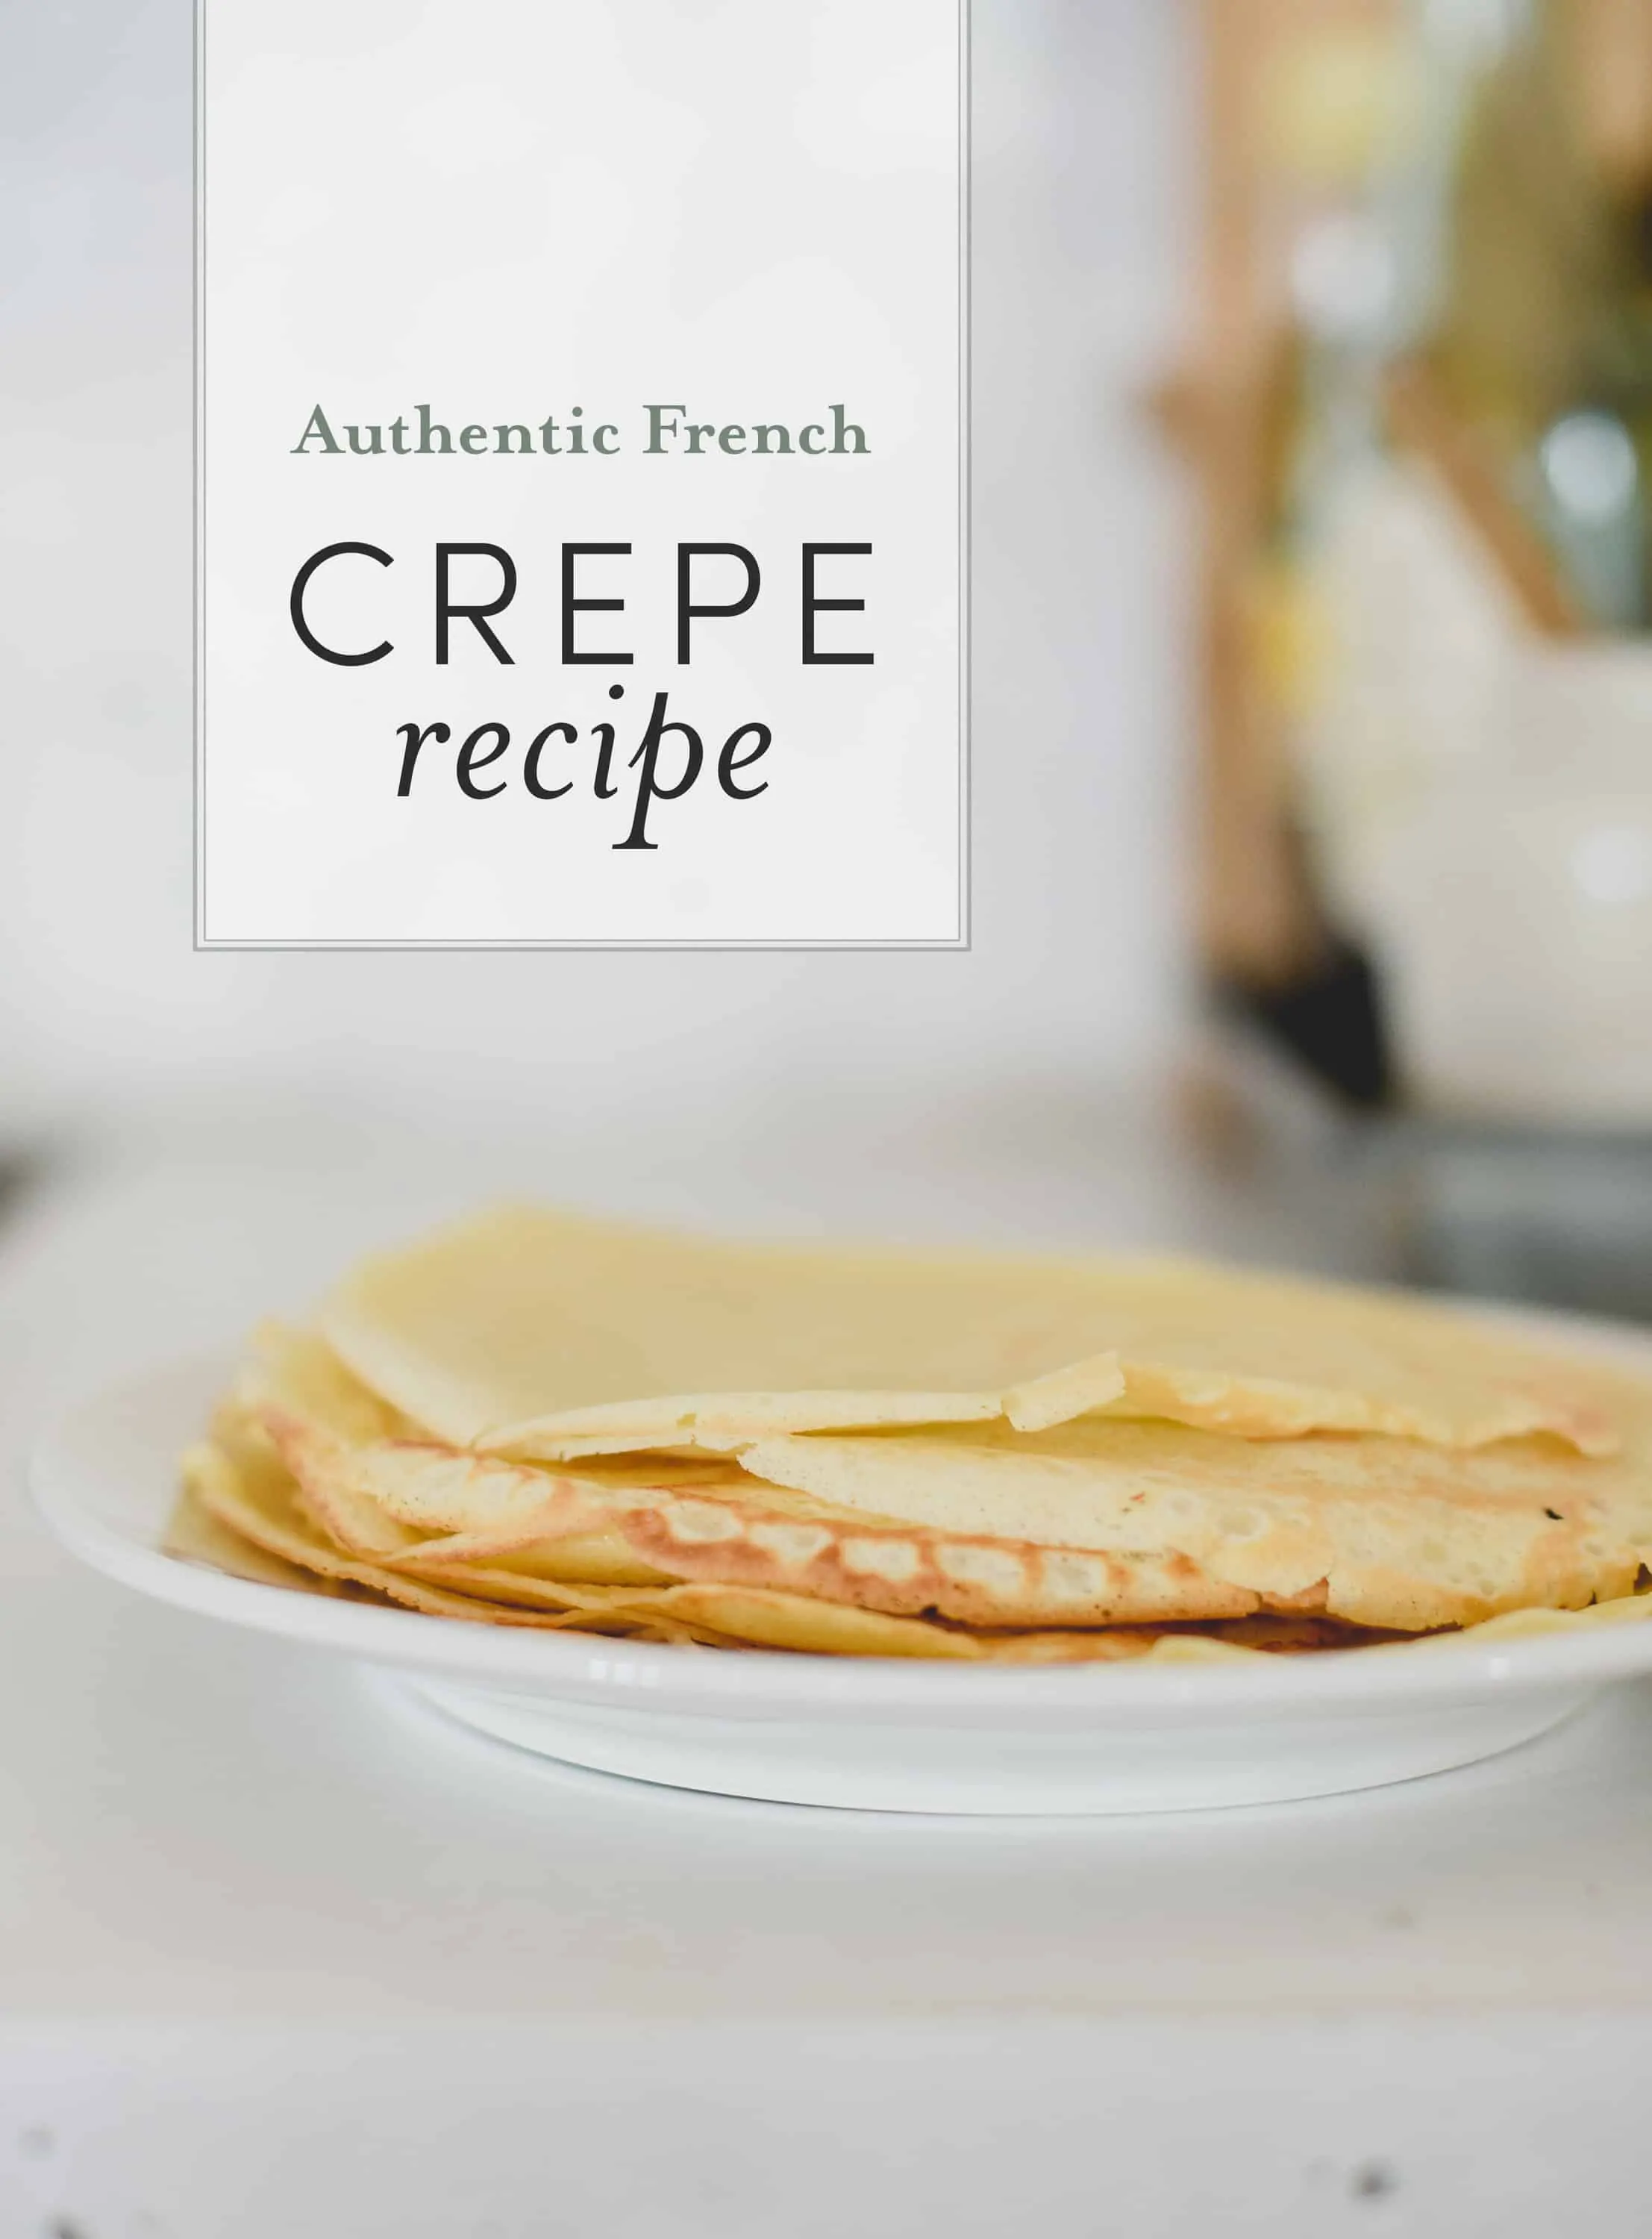 Looking for a delicious, authentic, and easy French crepe recipe? This family recipe will become a Sunday morning favorite! Use this French crepe recipe for savory or sweet crepes to enjoy for breakfast, lunch, or dinner! 